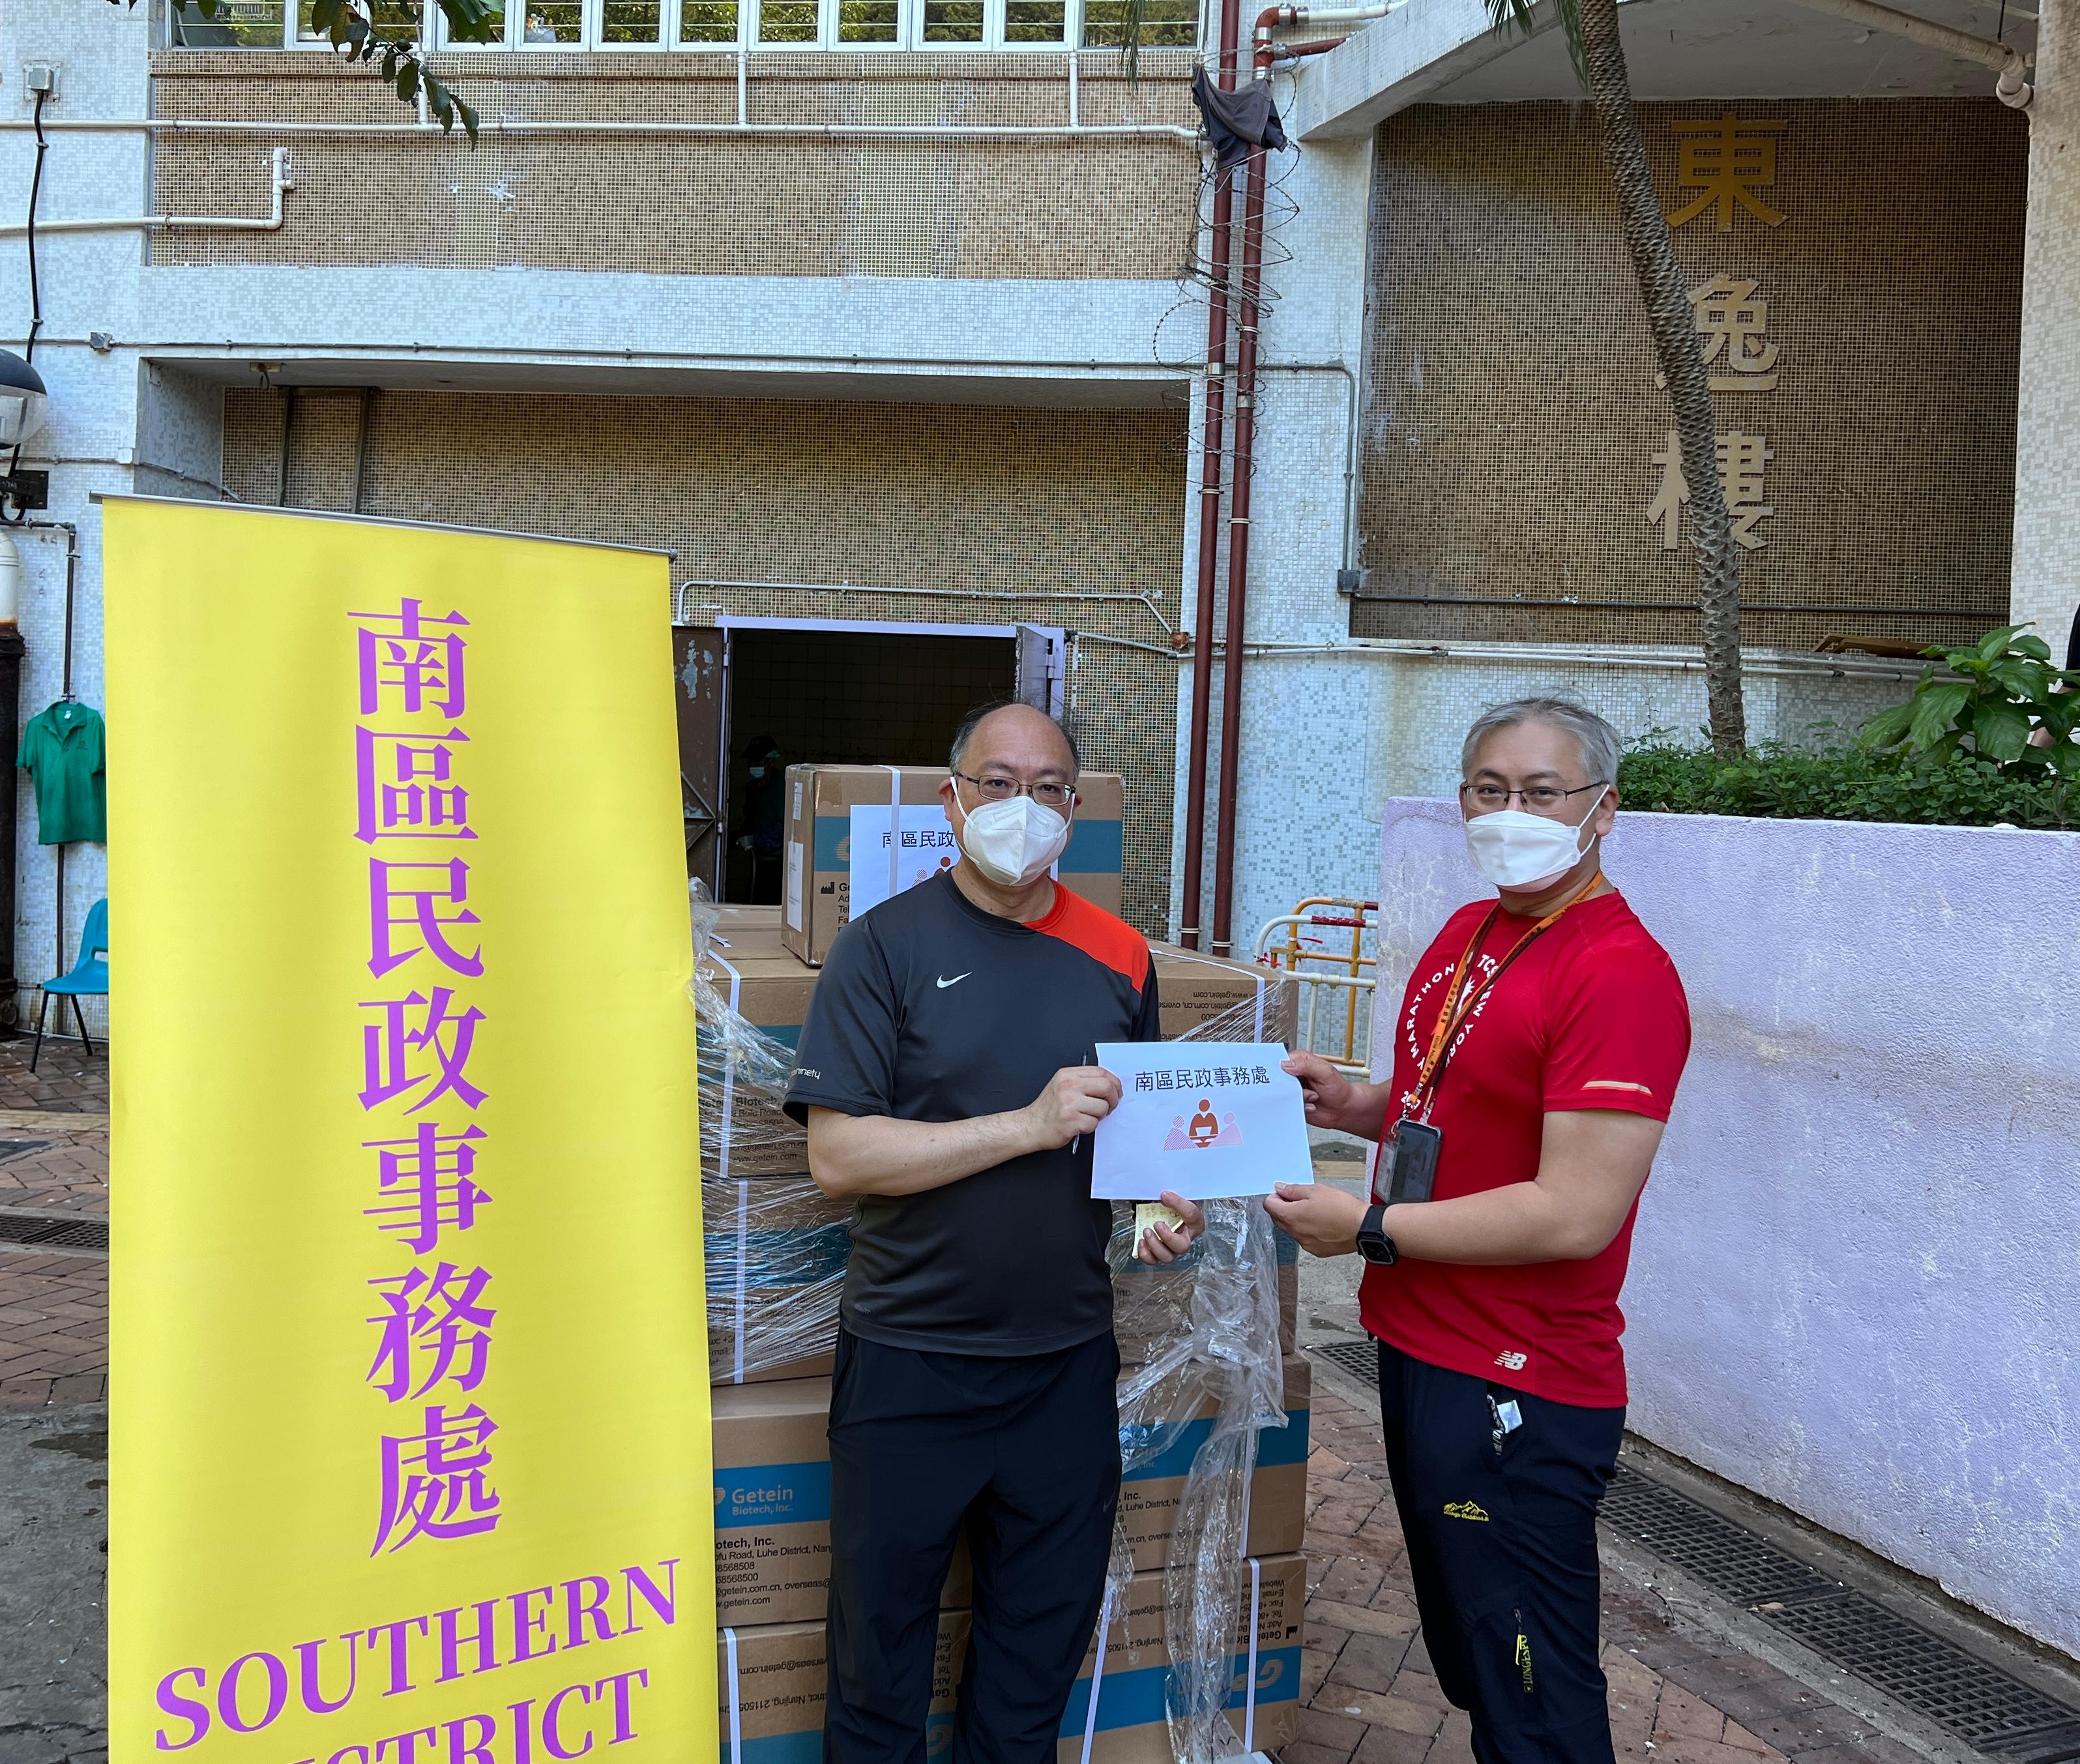 The Southern District Office today (July 12) distributed COVID-19 rapid test kits to households, cleansing workers and property management staff living and working in Lei Tung Estate for voluntary testing through the property management company.